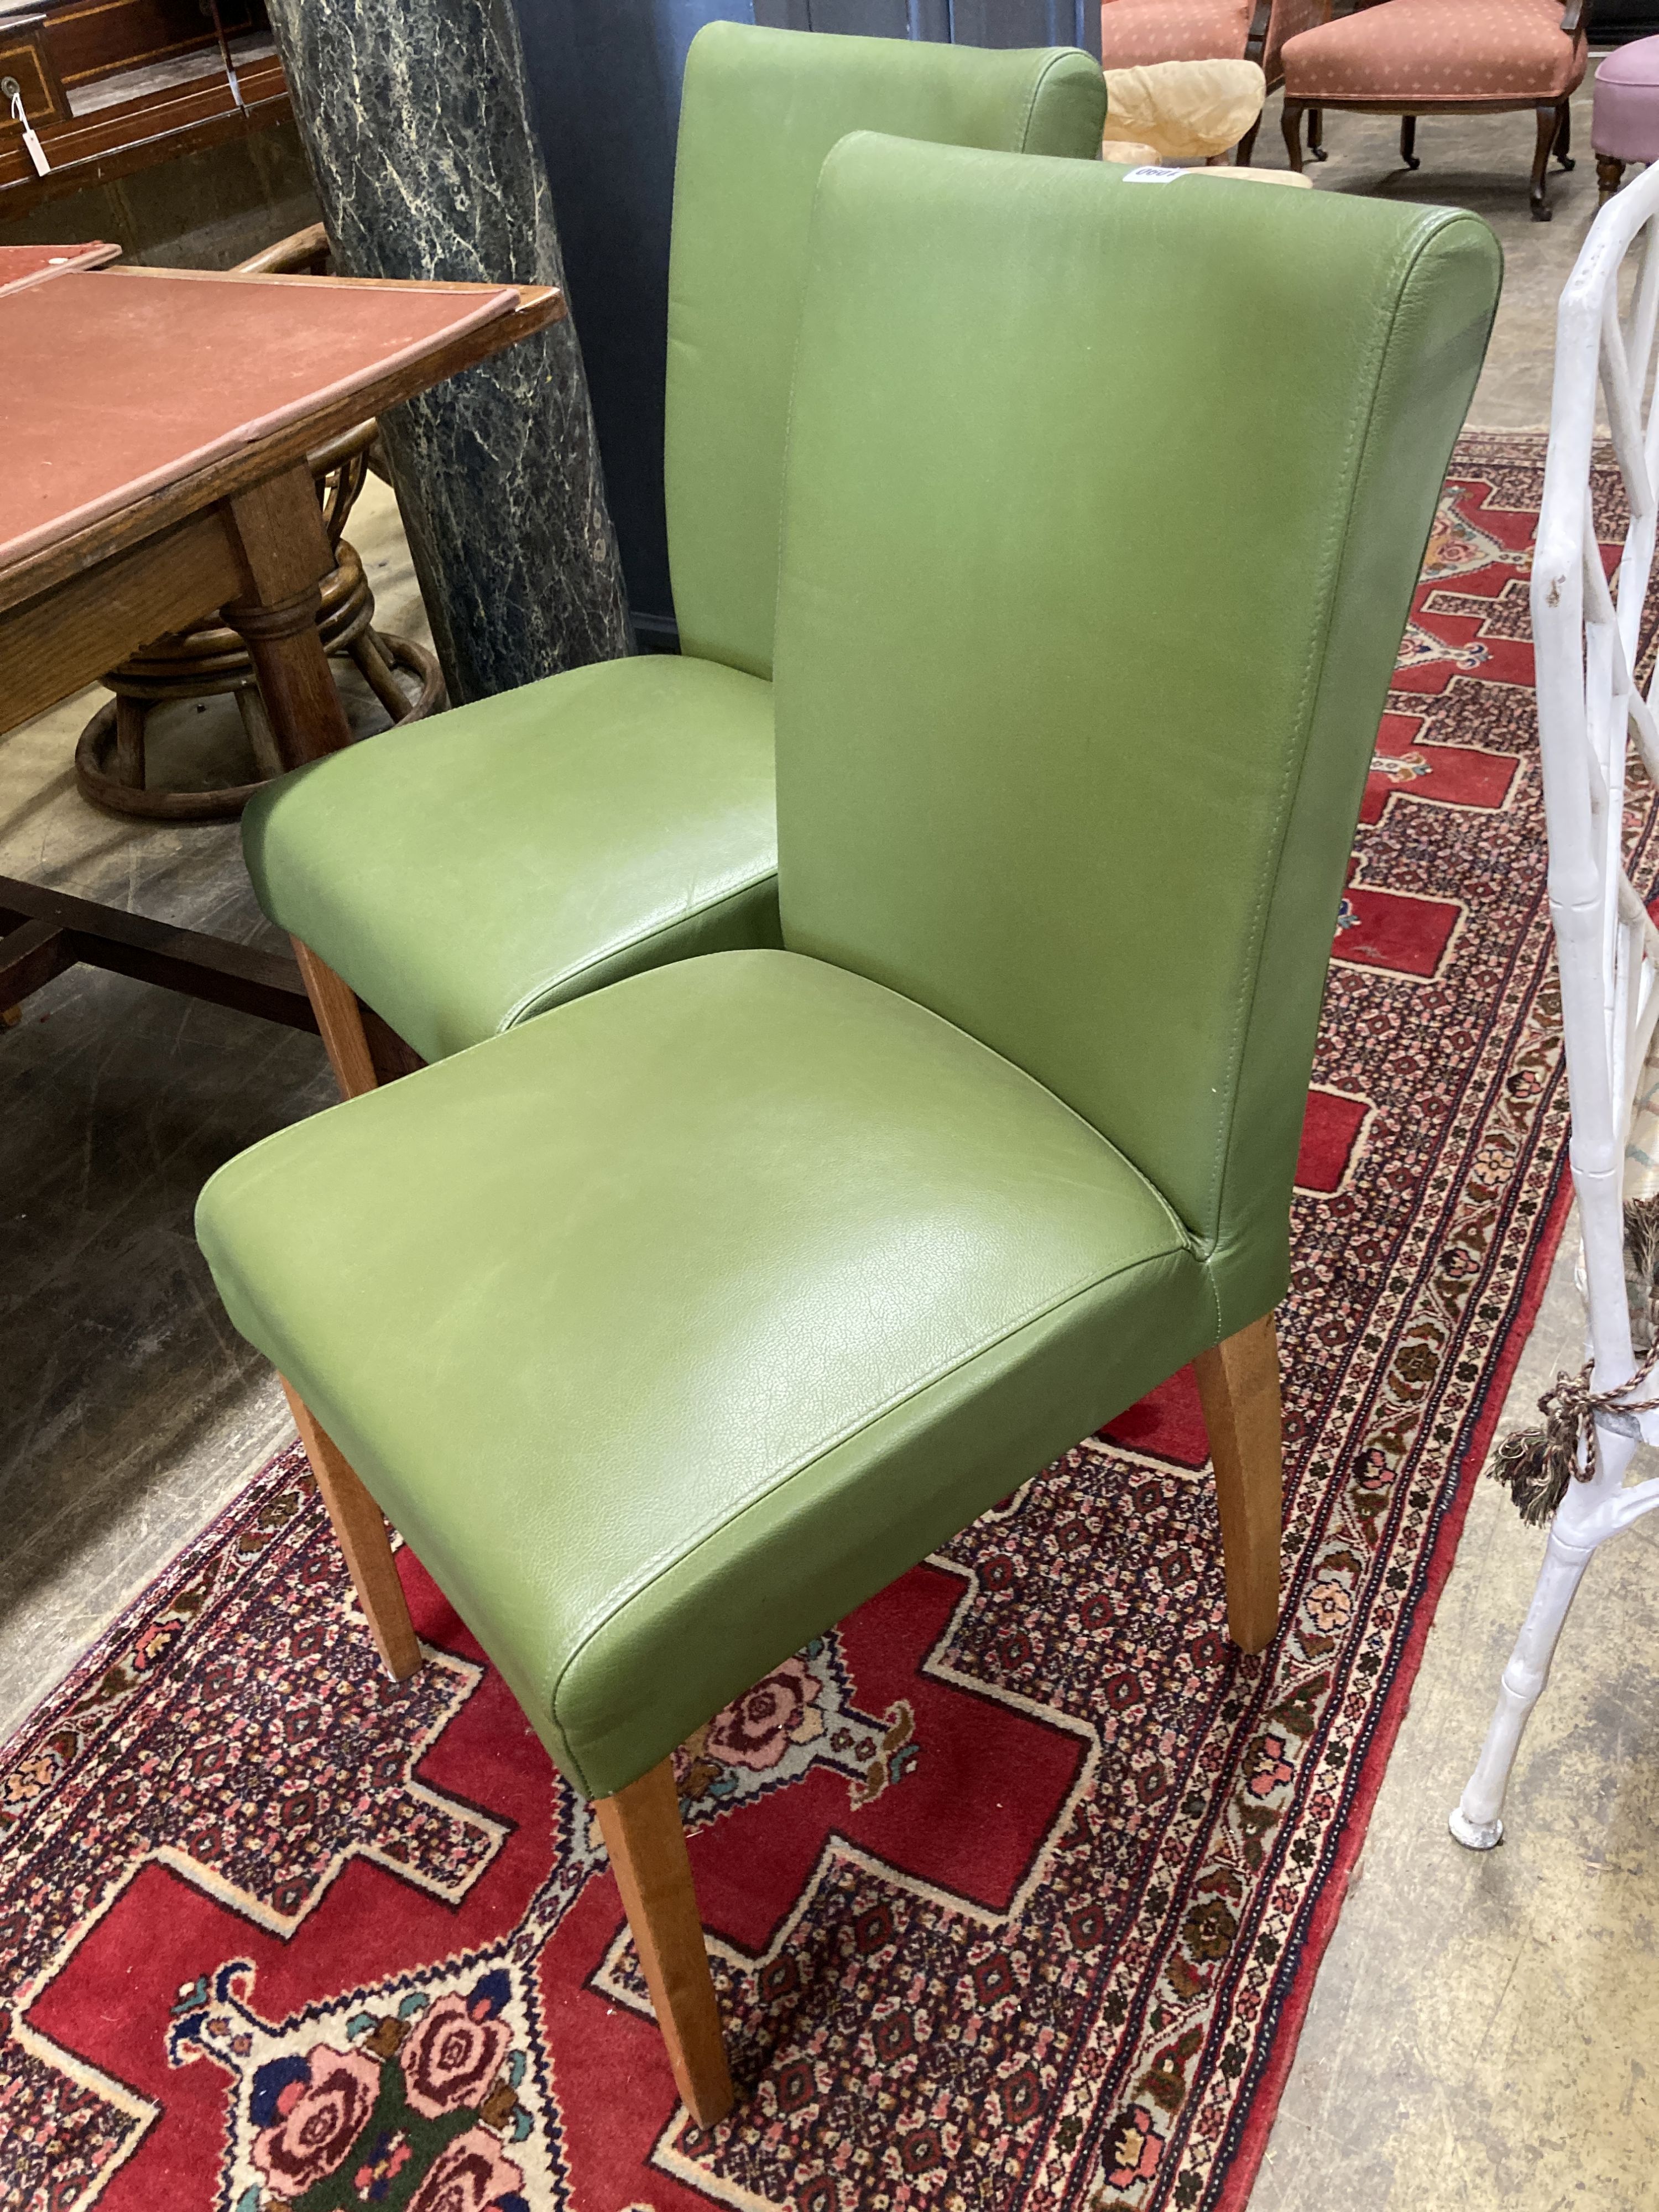 A set of eight contemporary oak and green leather dining chairs, width 45cm, depth 50cm, height 95cm